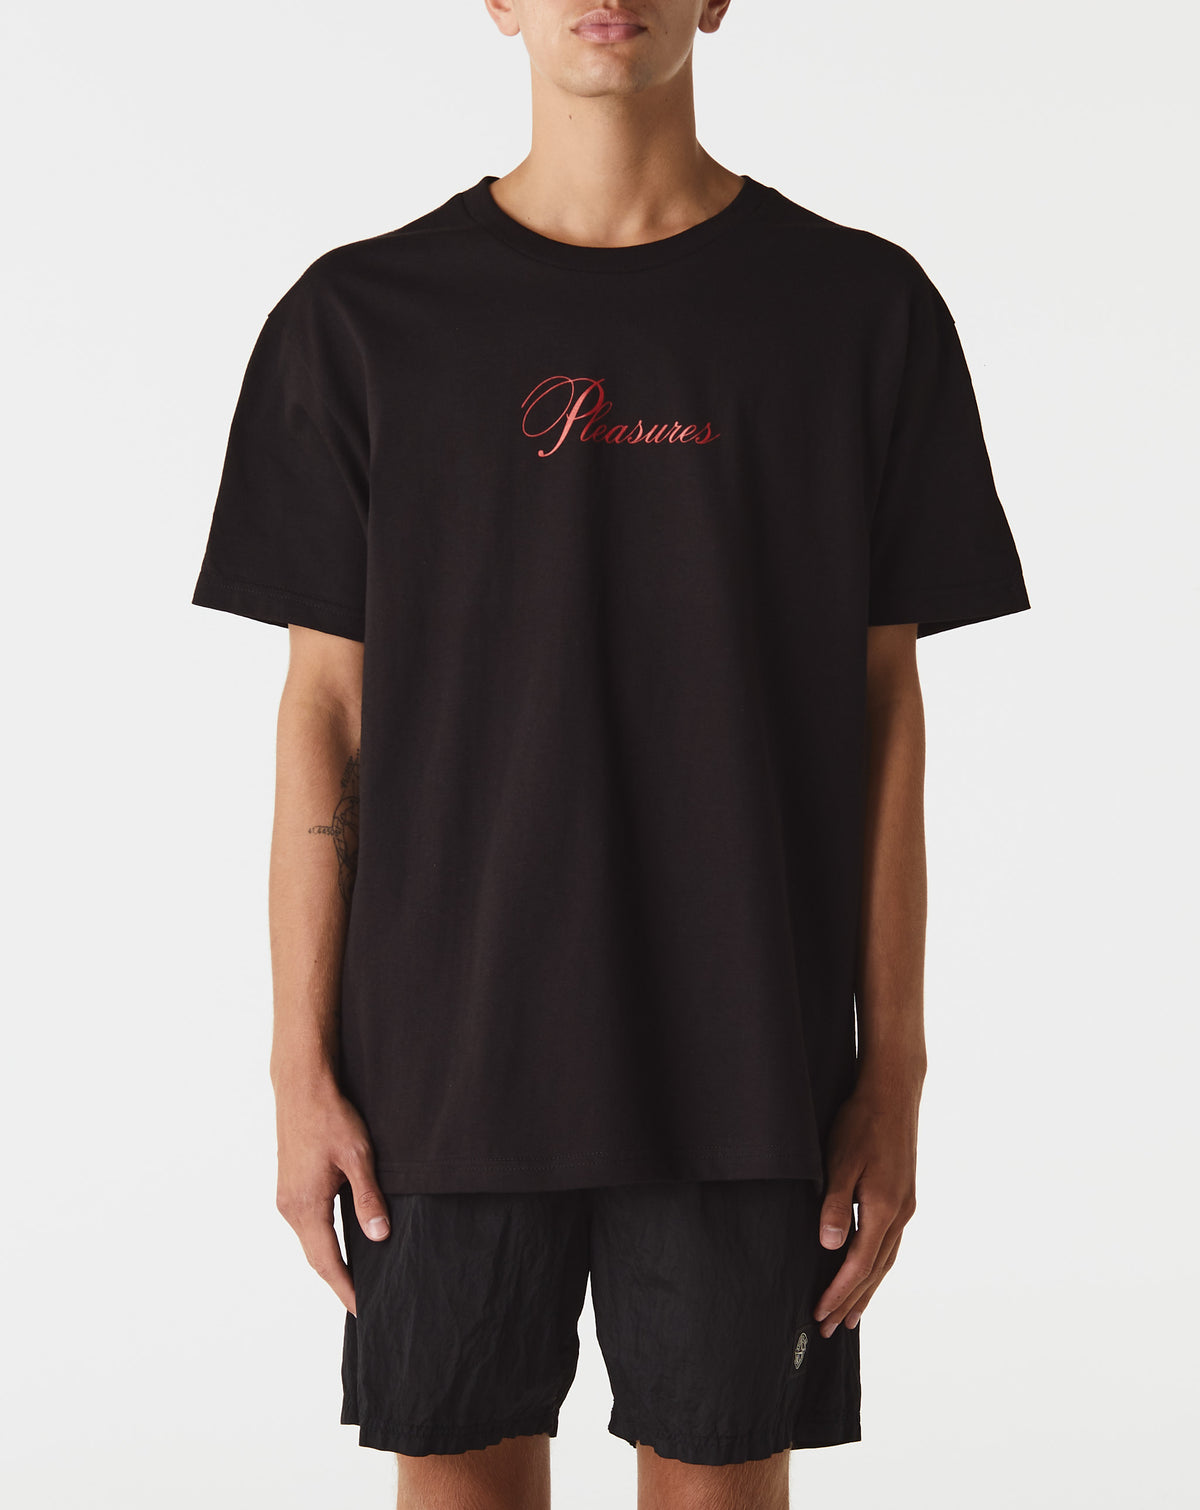 Pleasures Stack T-Shirt - Rule of Next Apparel